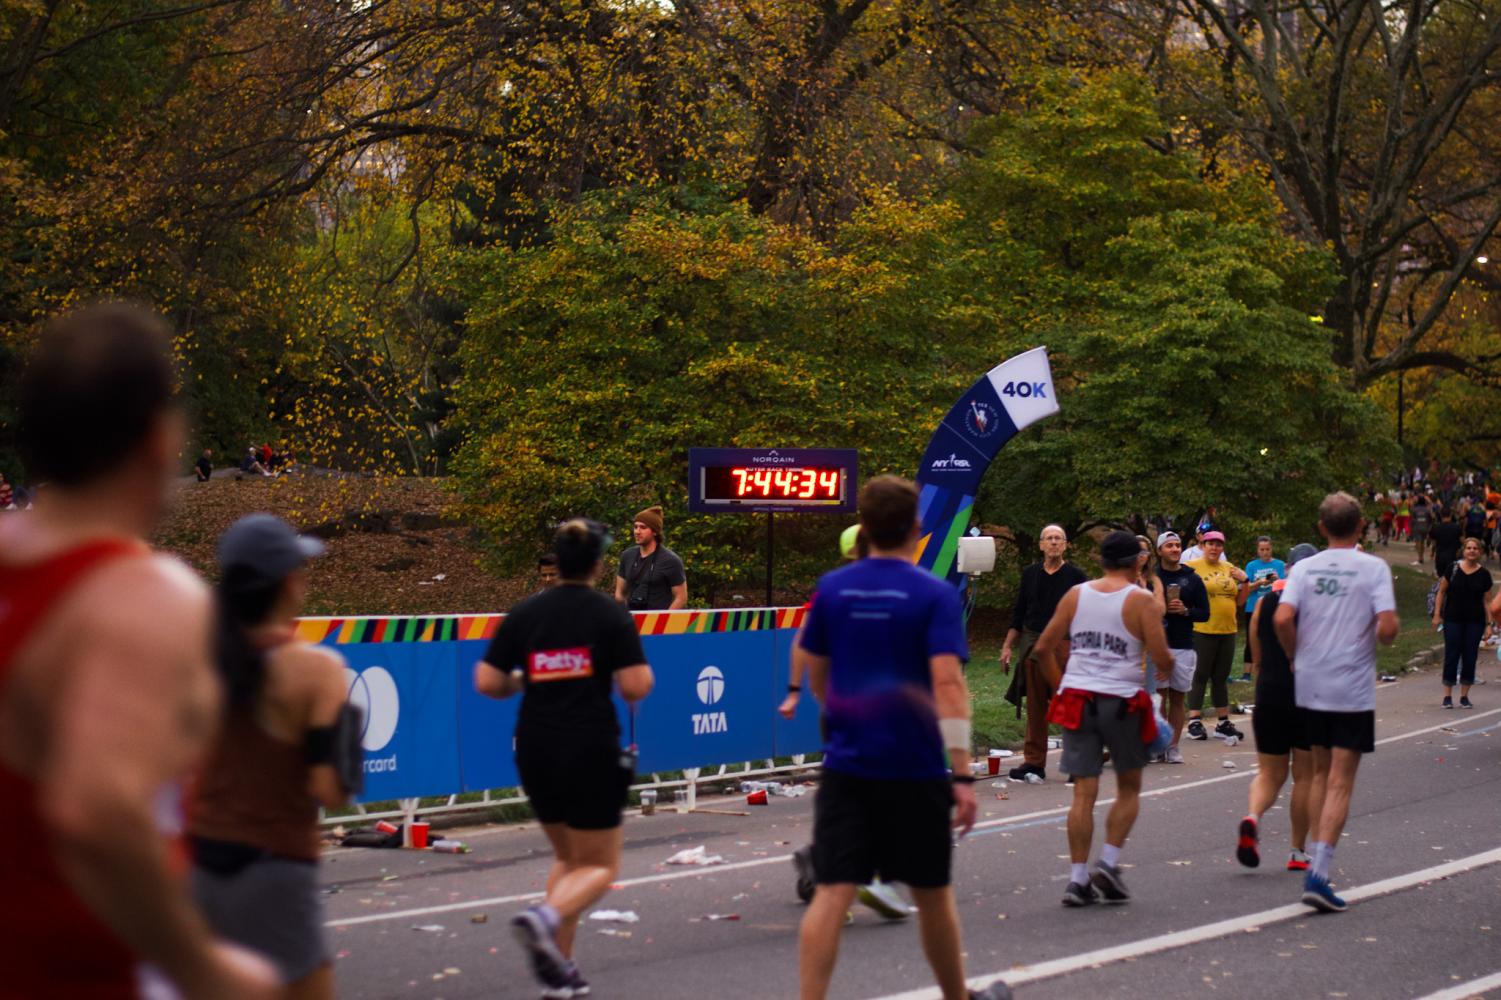 Runners wear blue, black and white shirts, and behind them is a clock that reads “7:44:34” in red text. Next to this clock, an arched sign reads “40 K”.